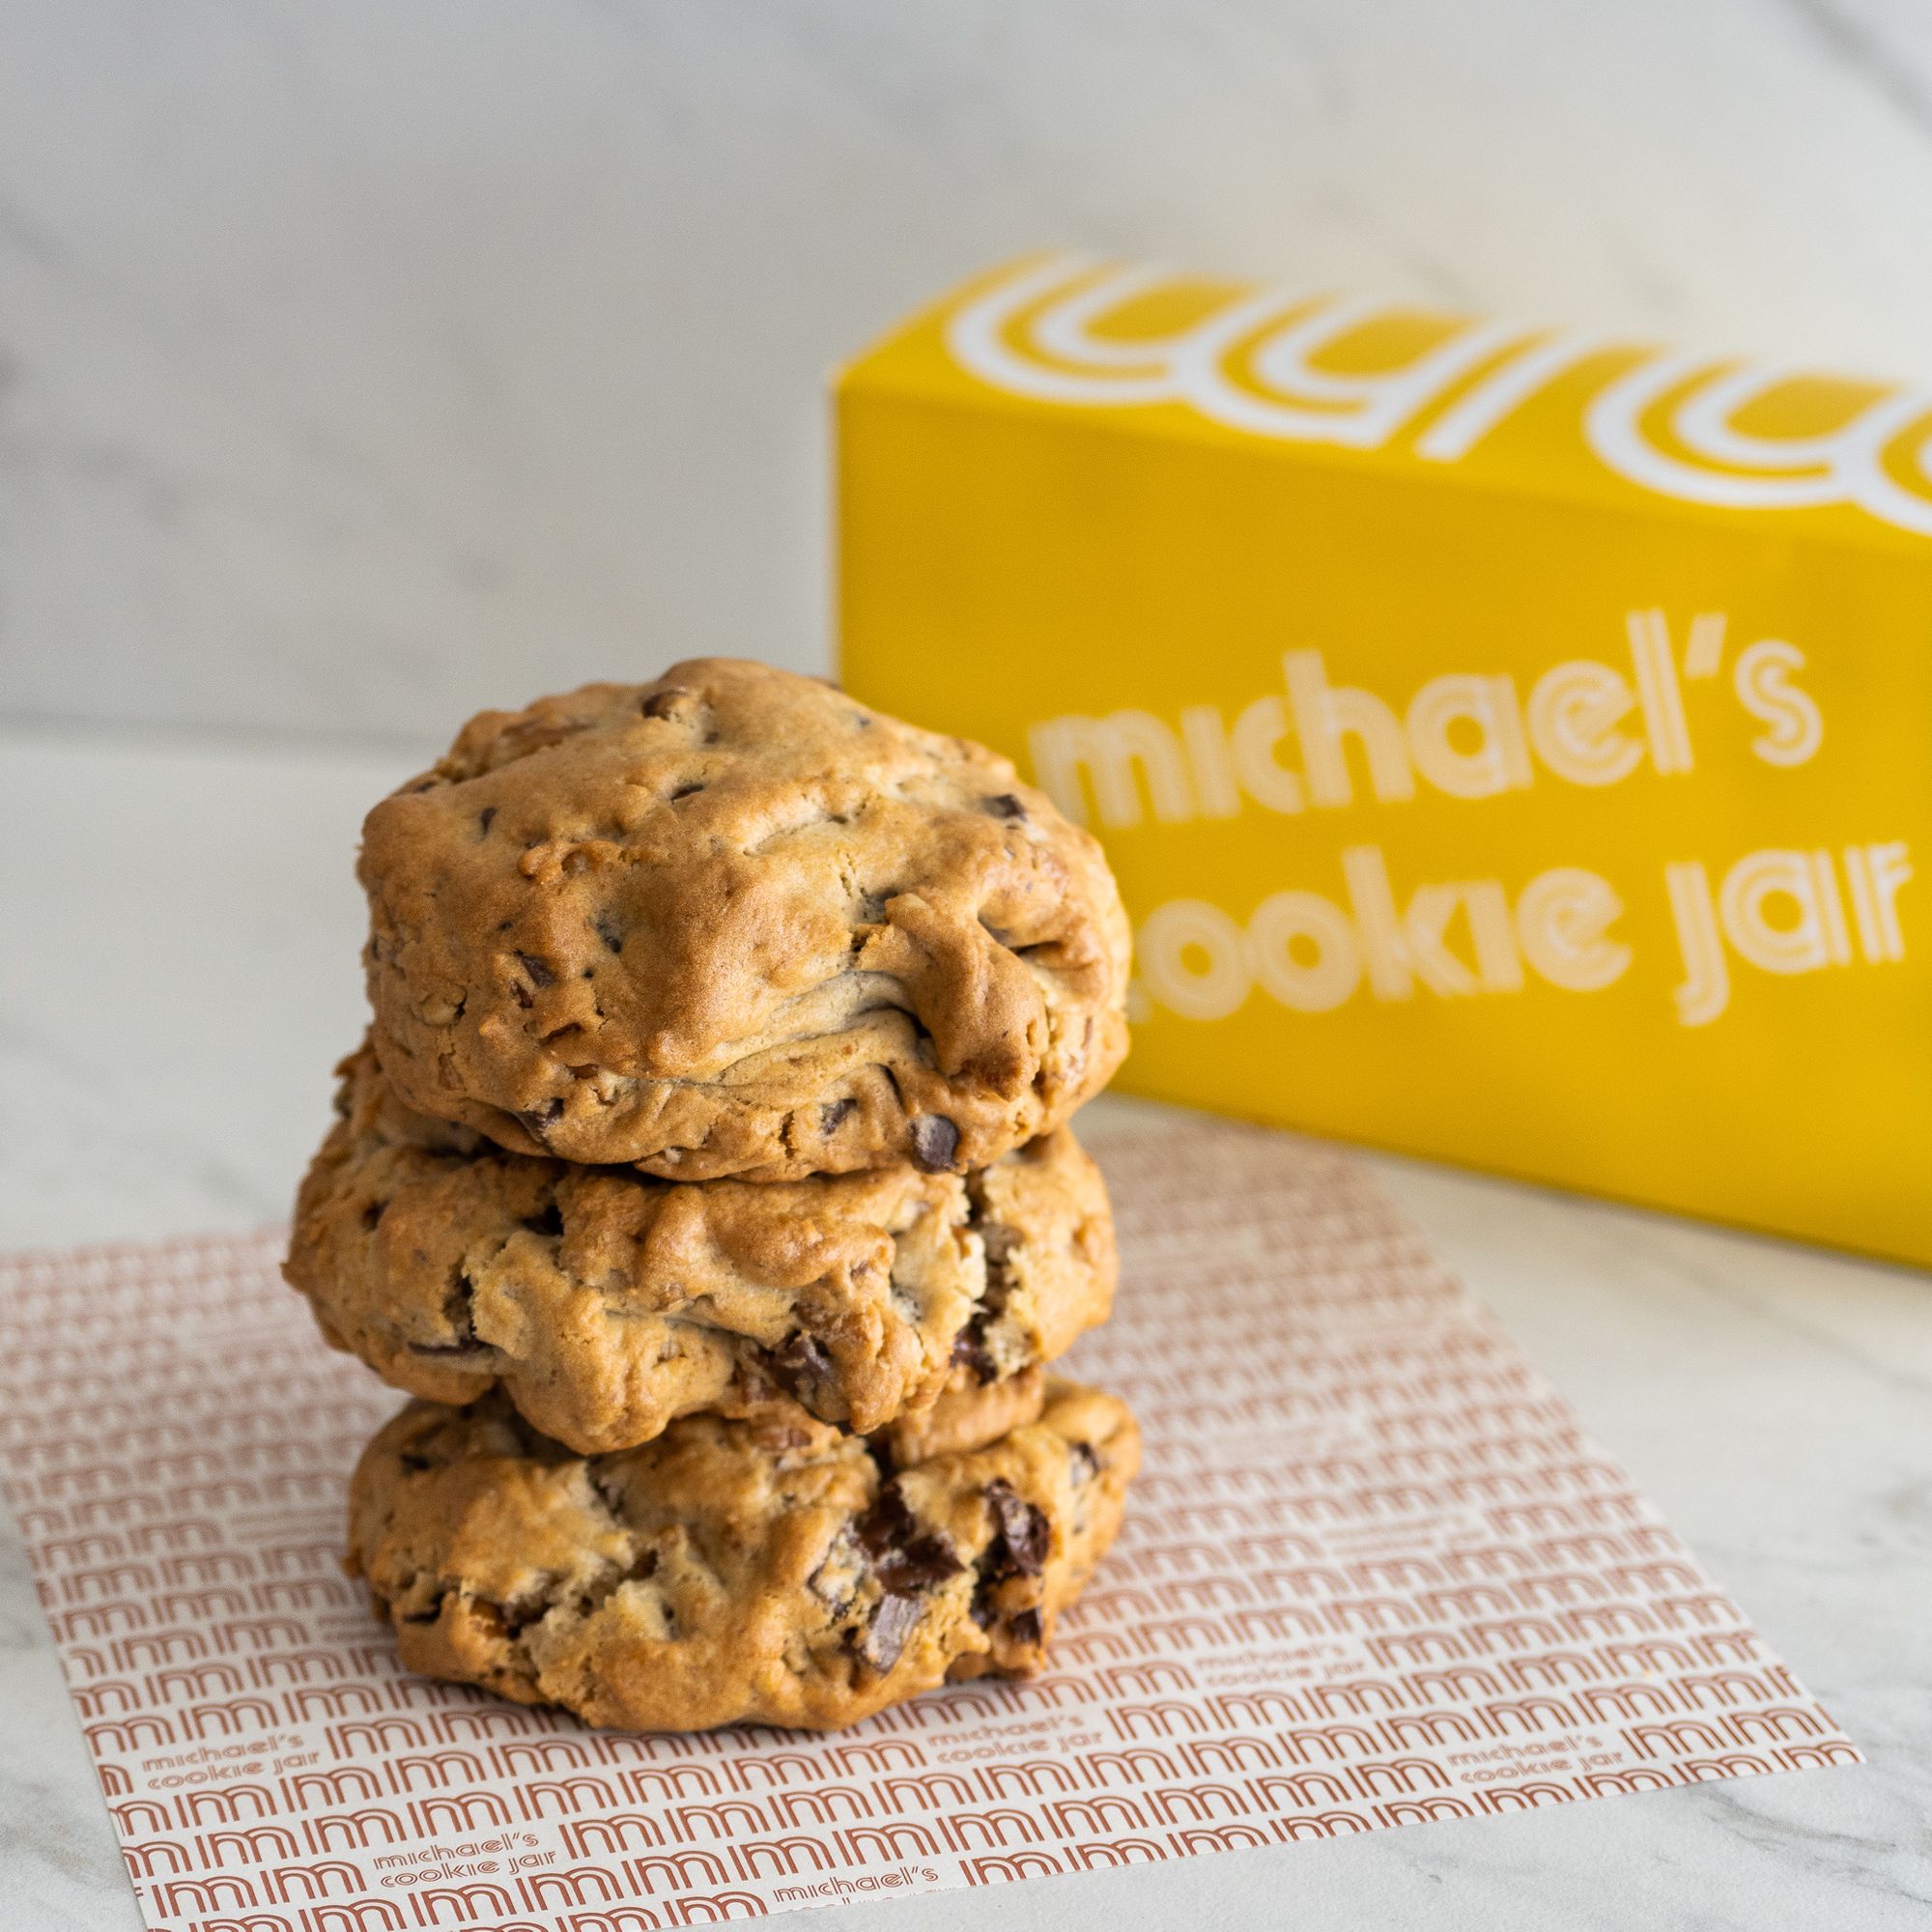 Michael's Cookie Jar: Serving Batches Made in Heaven